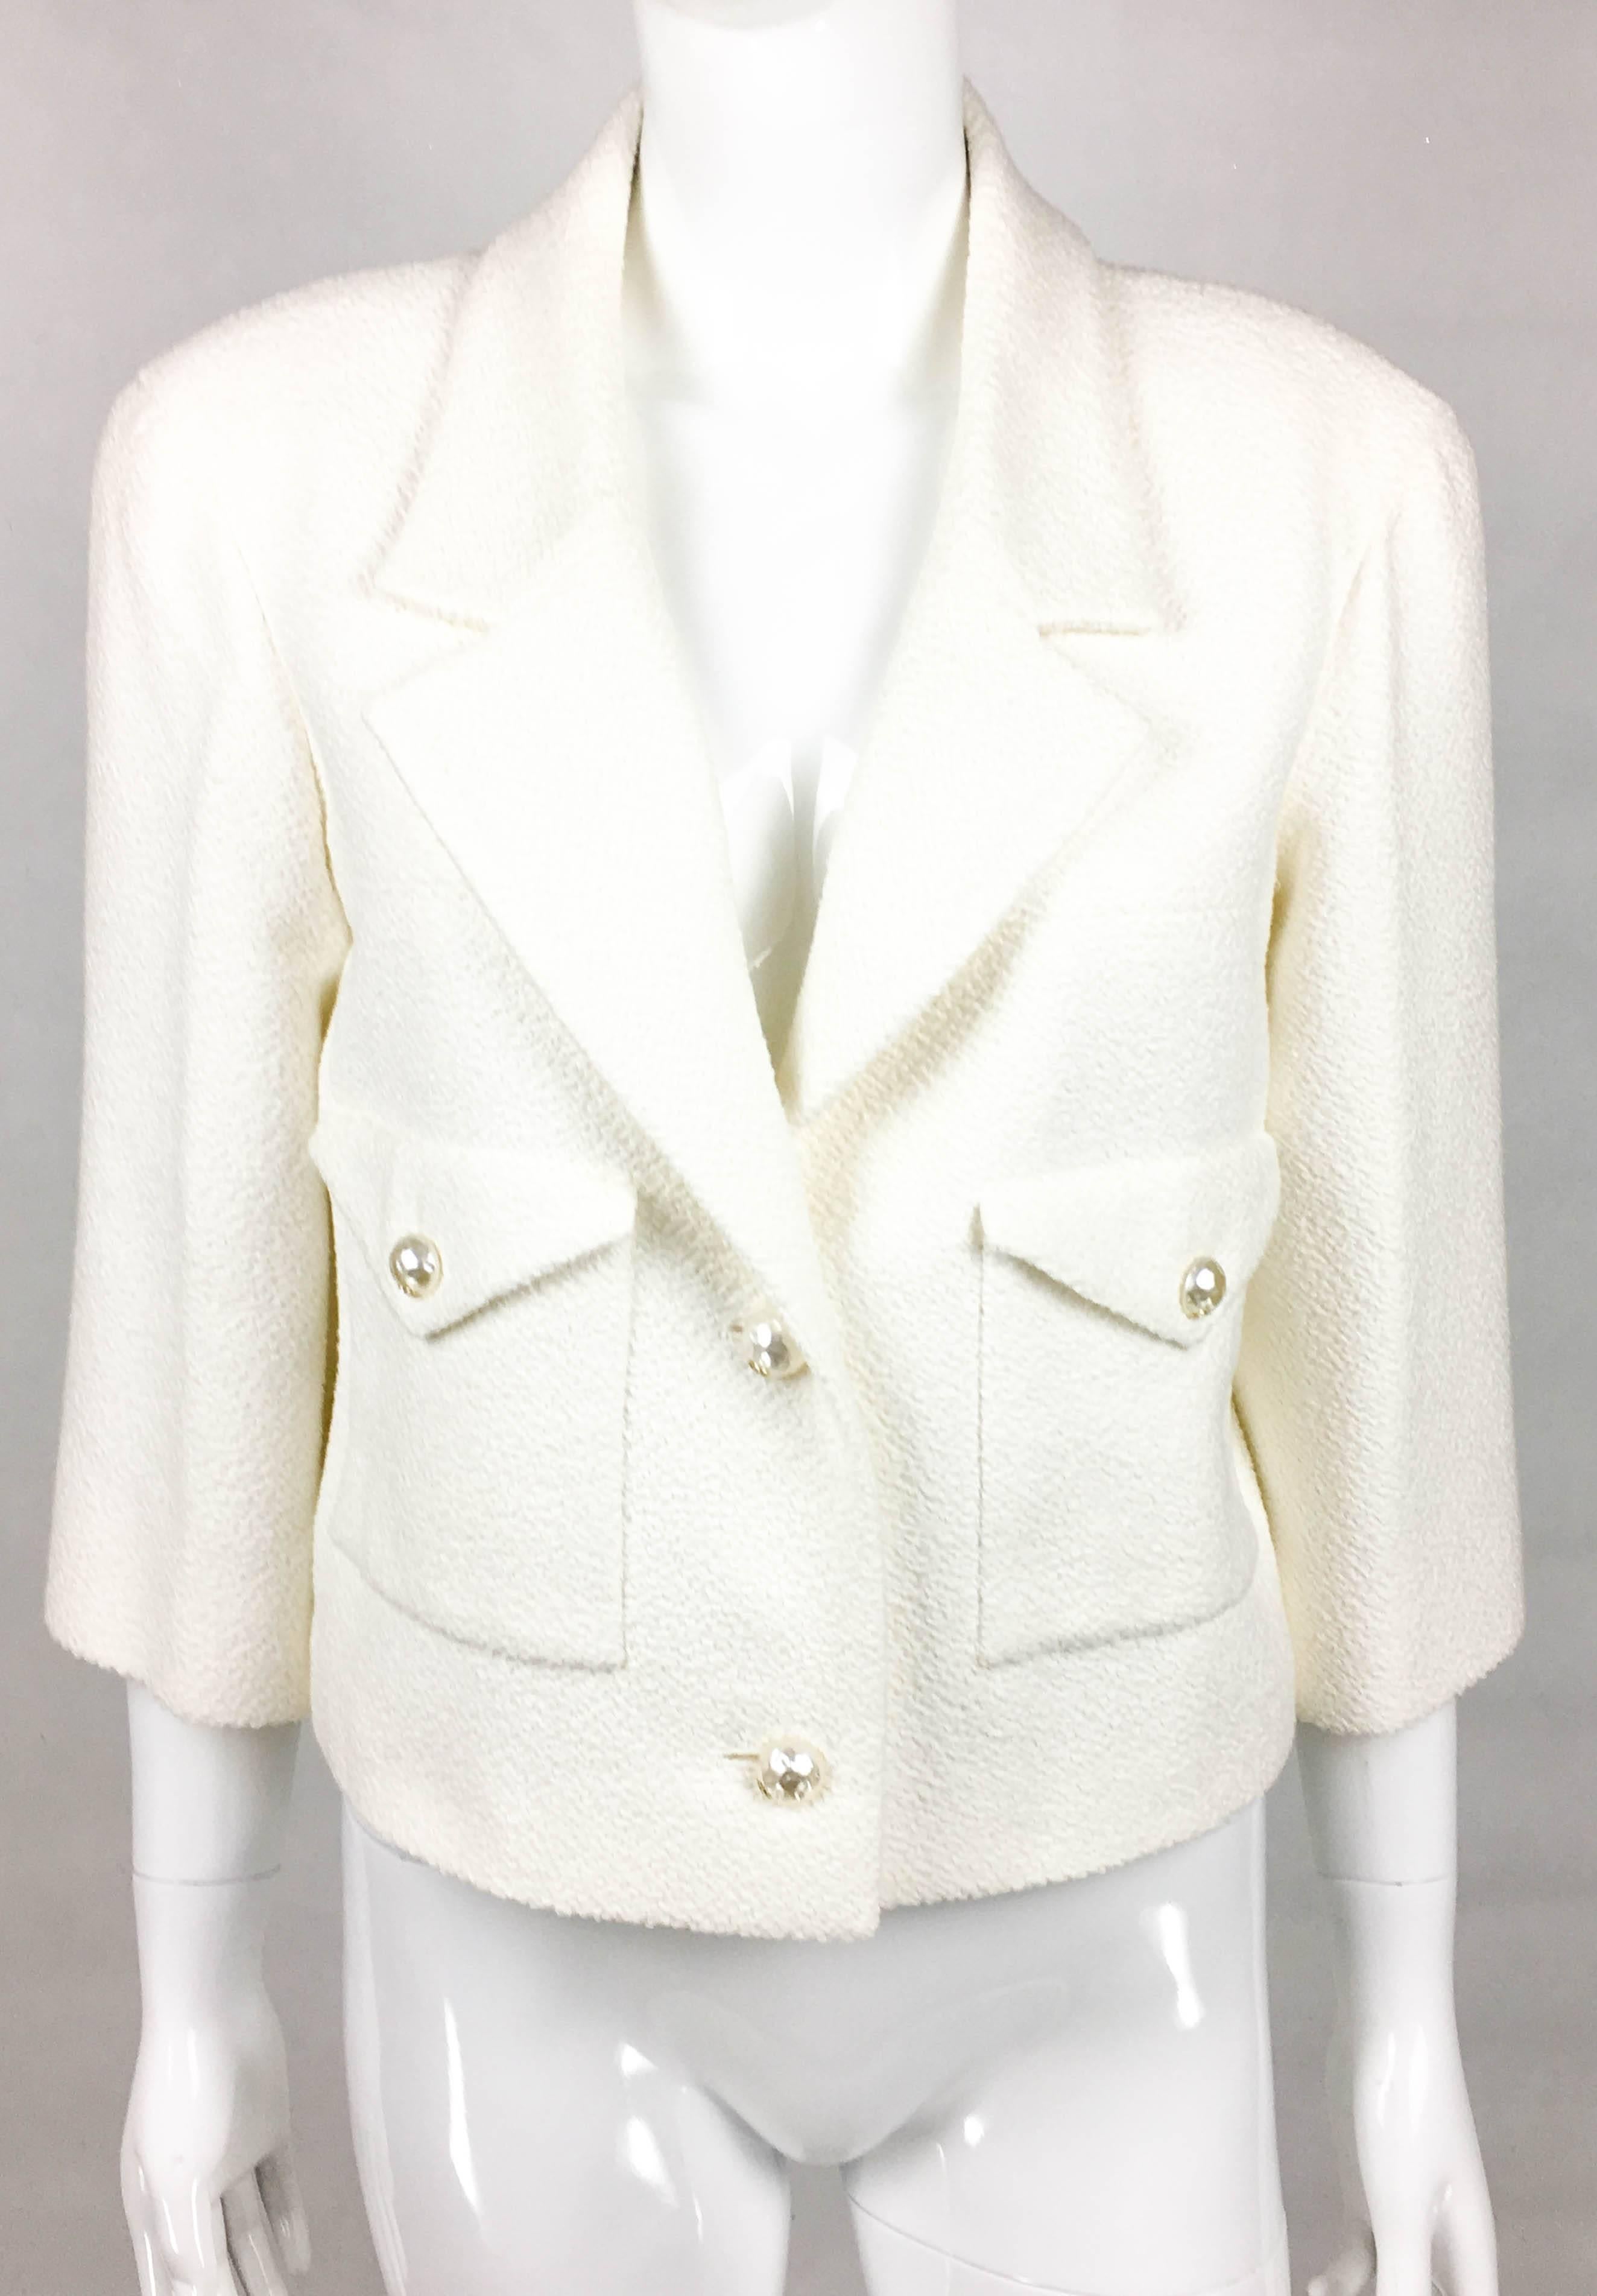 2012 Chanel Runway Look White Cotton Jacket With Faux-Pearl Buttons In Excellent Condition In London, Chelsea